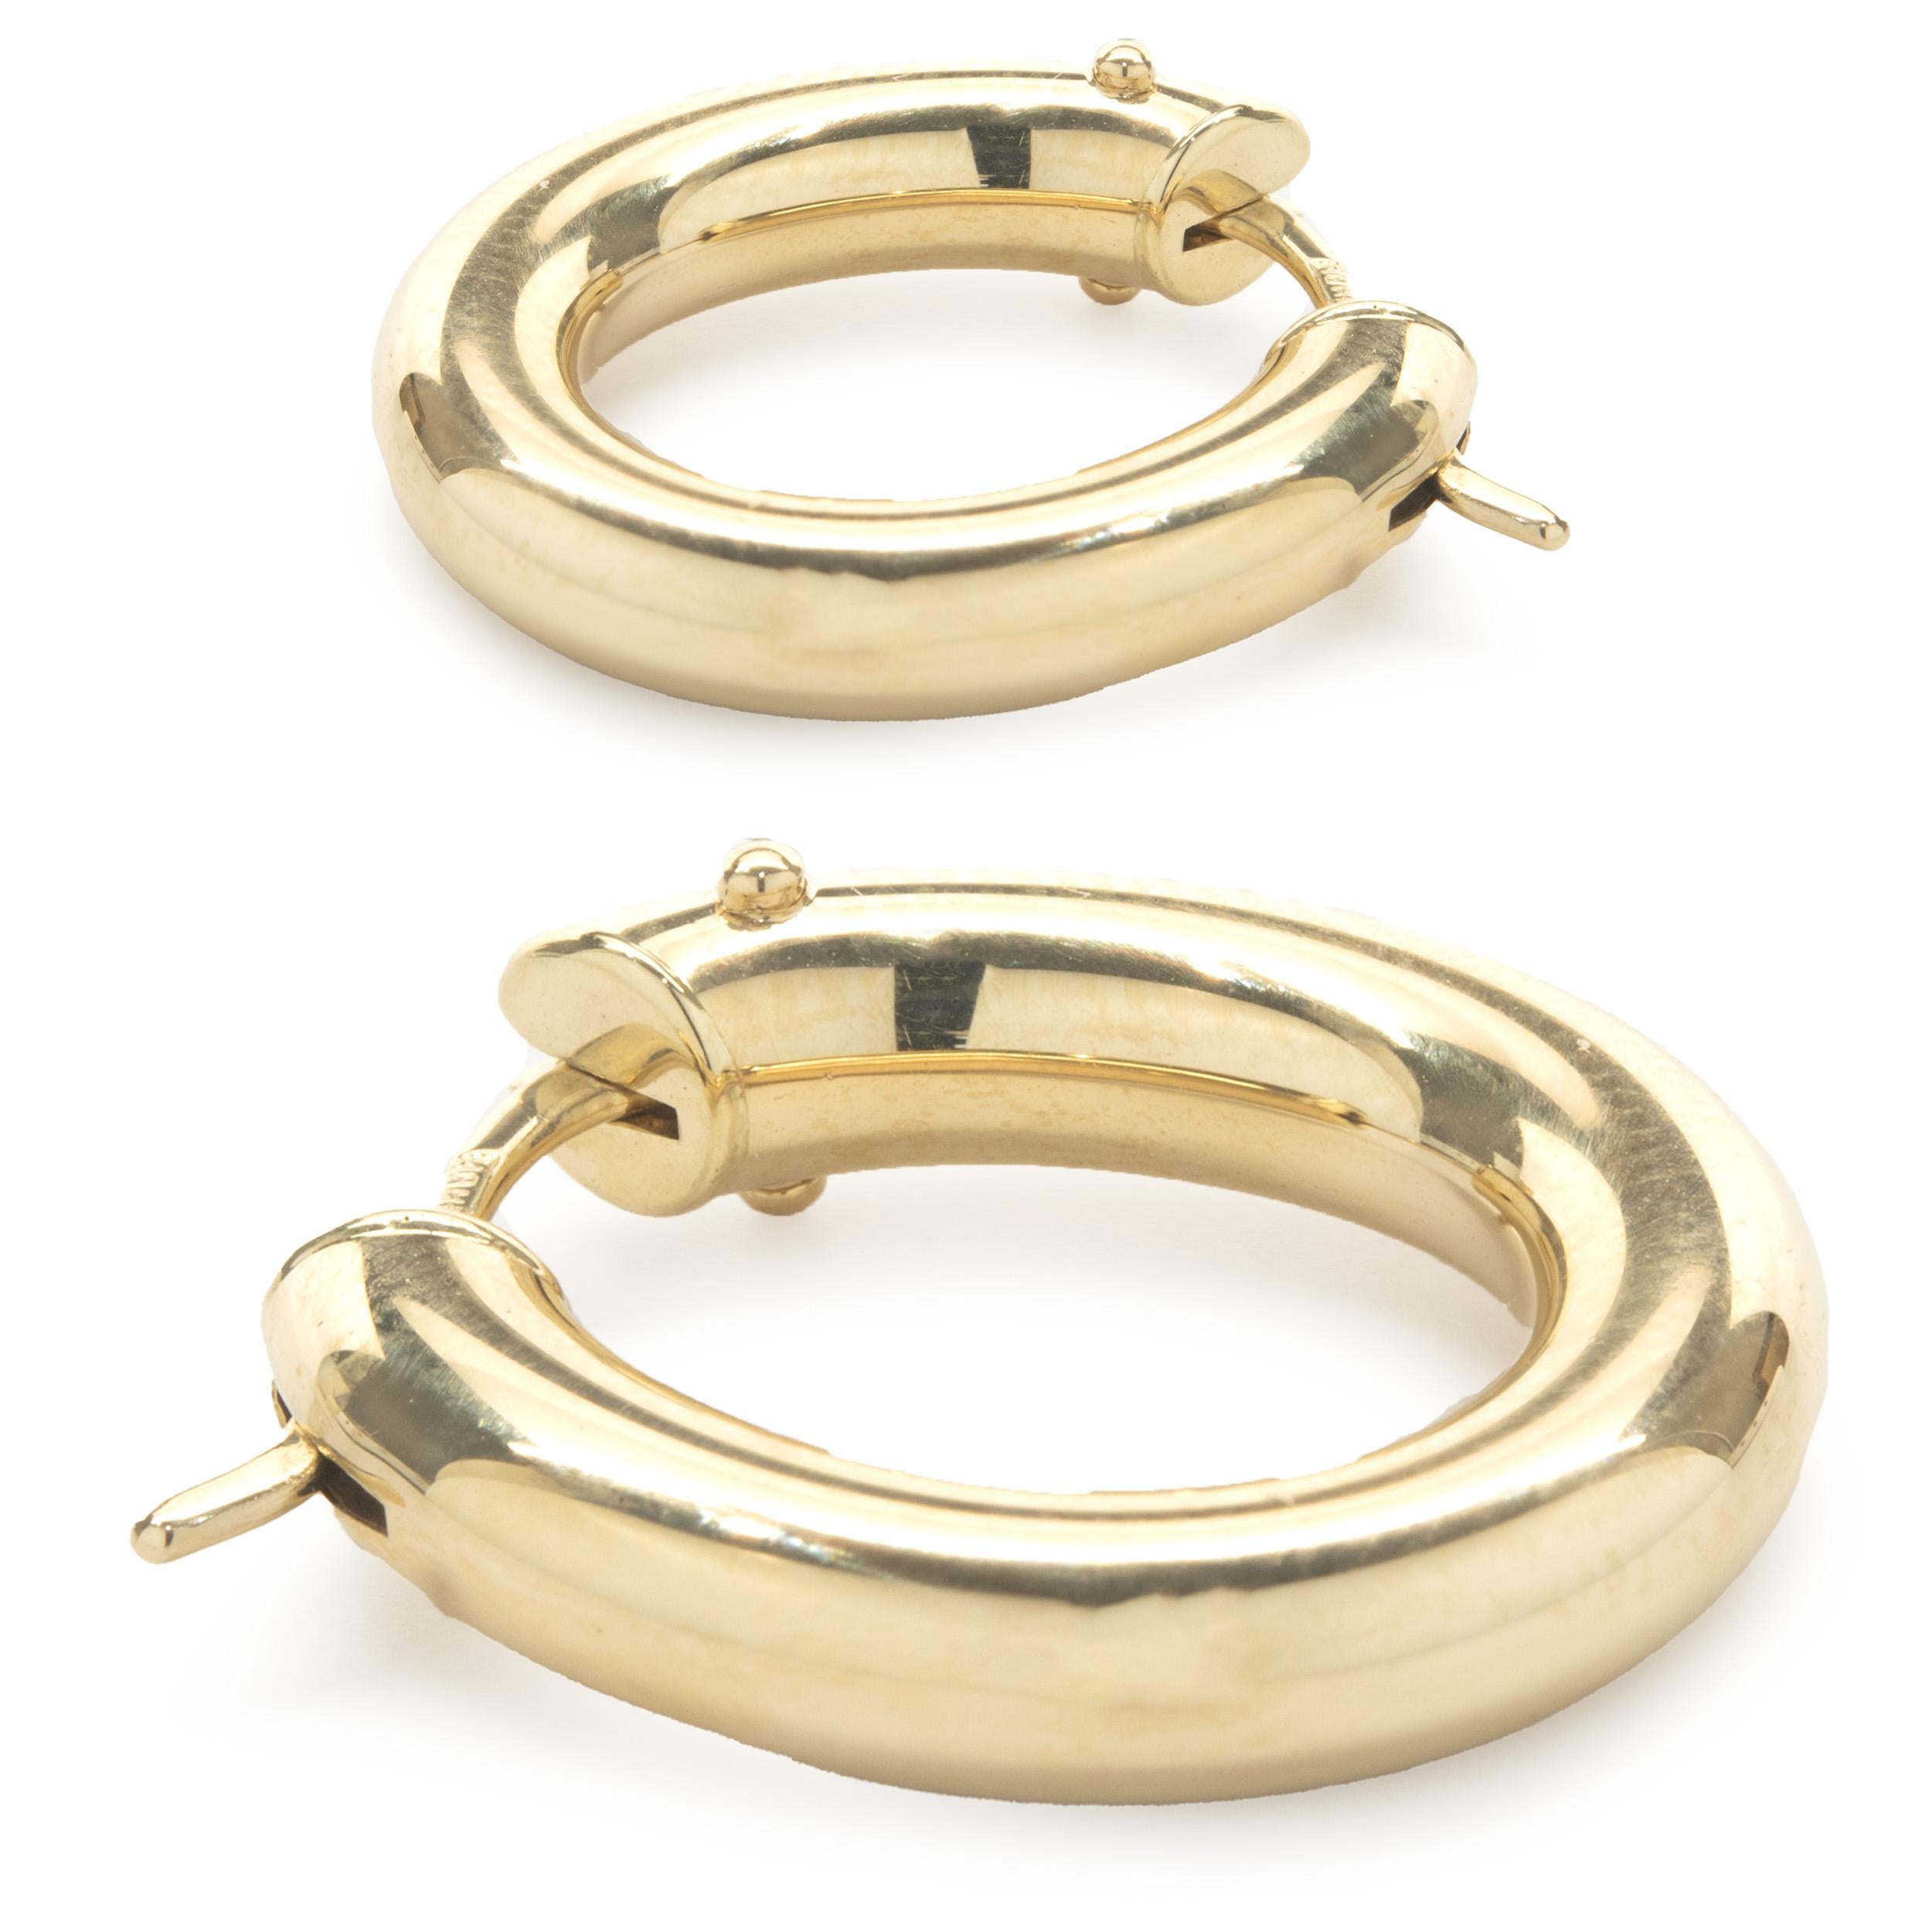 Material: 18K yellow gold
Dimensions: earrings measure 19.50mm in length
Weight: 3.00 grams